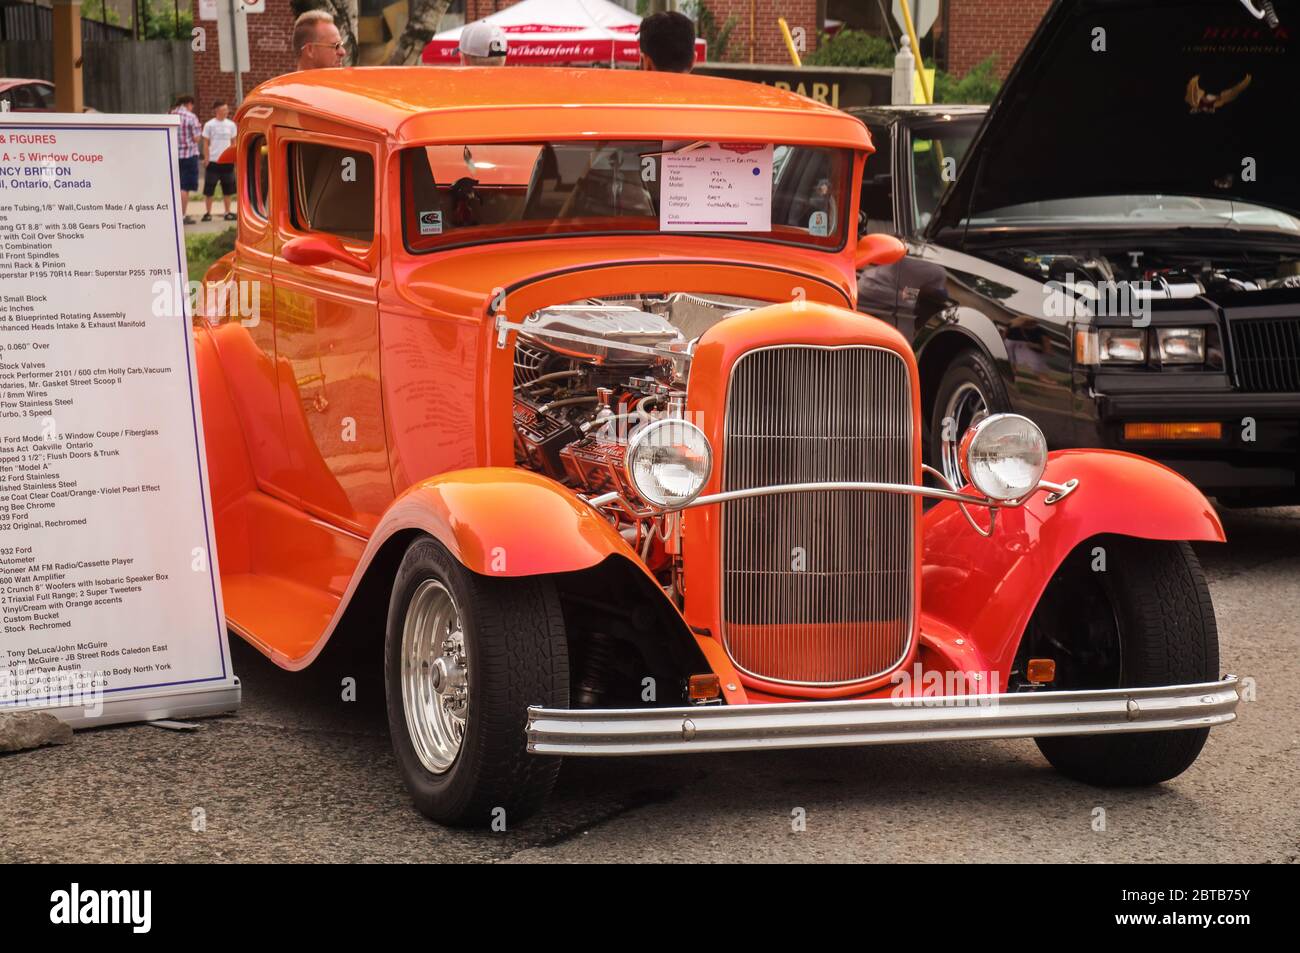 TORONTO, CANADA - 08 18 2018: 1931 Ford Model A oldtimer car on display at the open air auto show Wheels on the Danforth Stock Photo